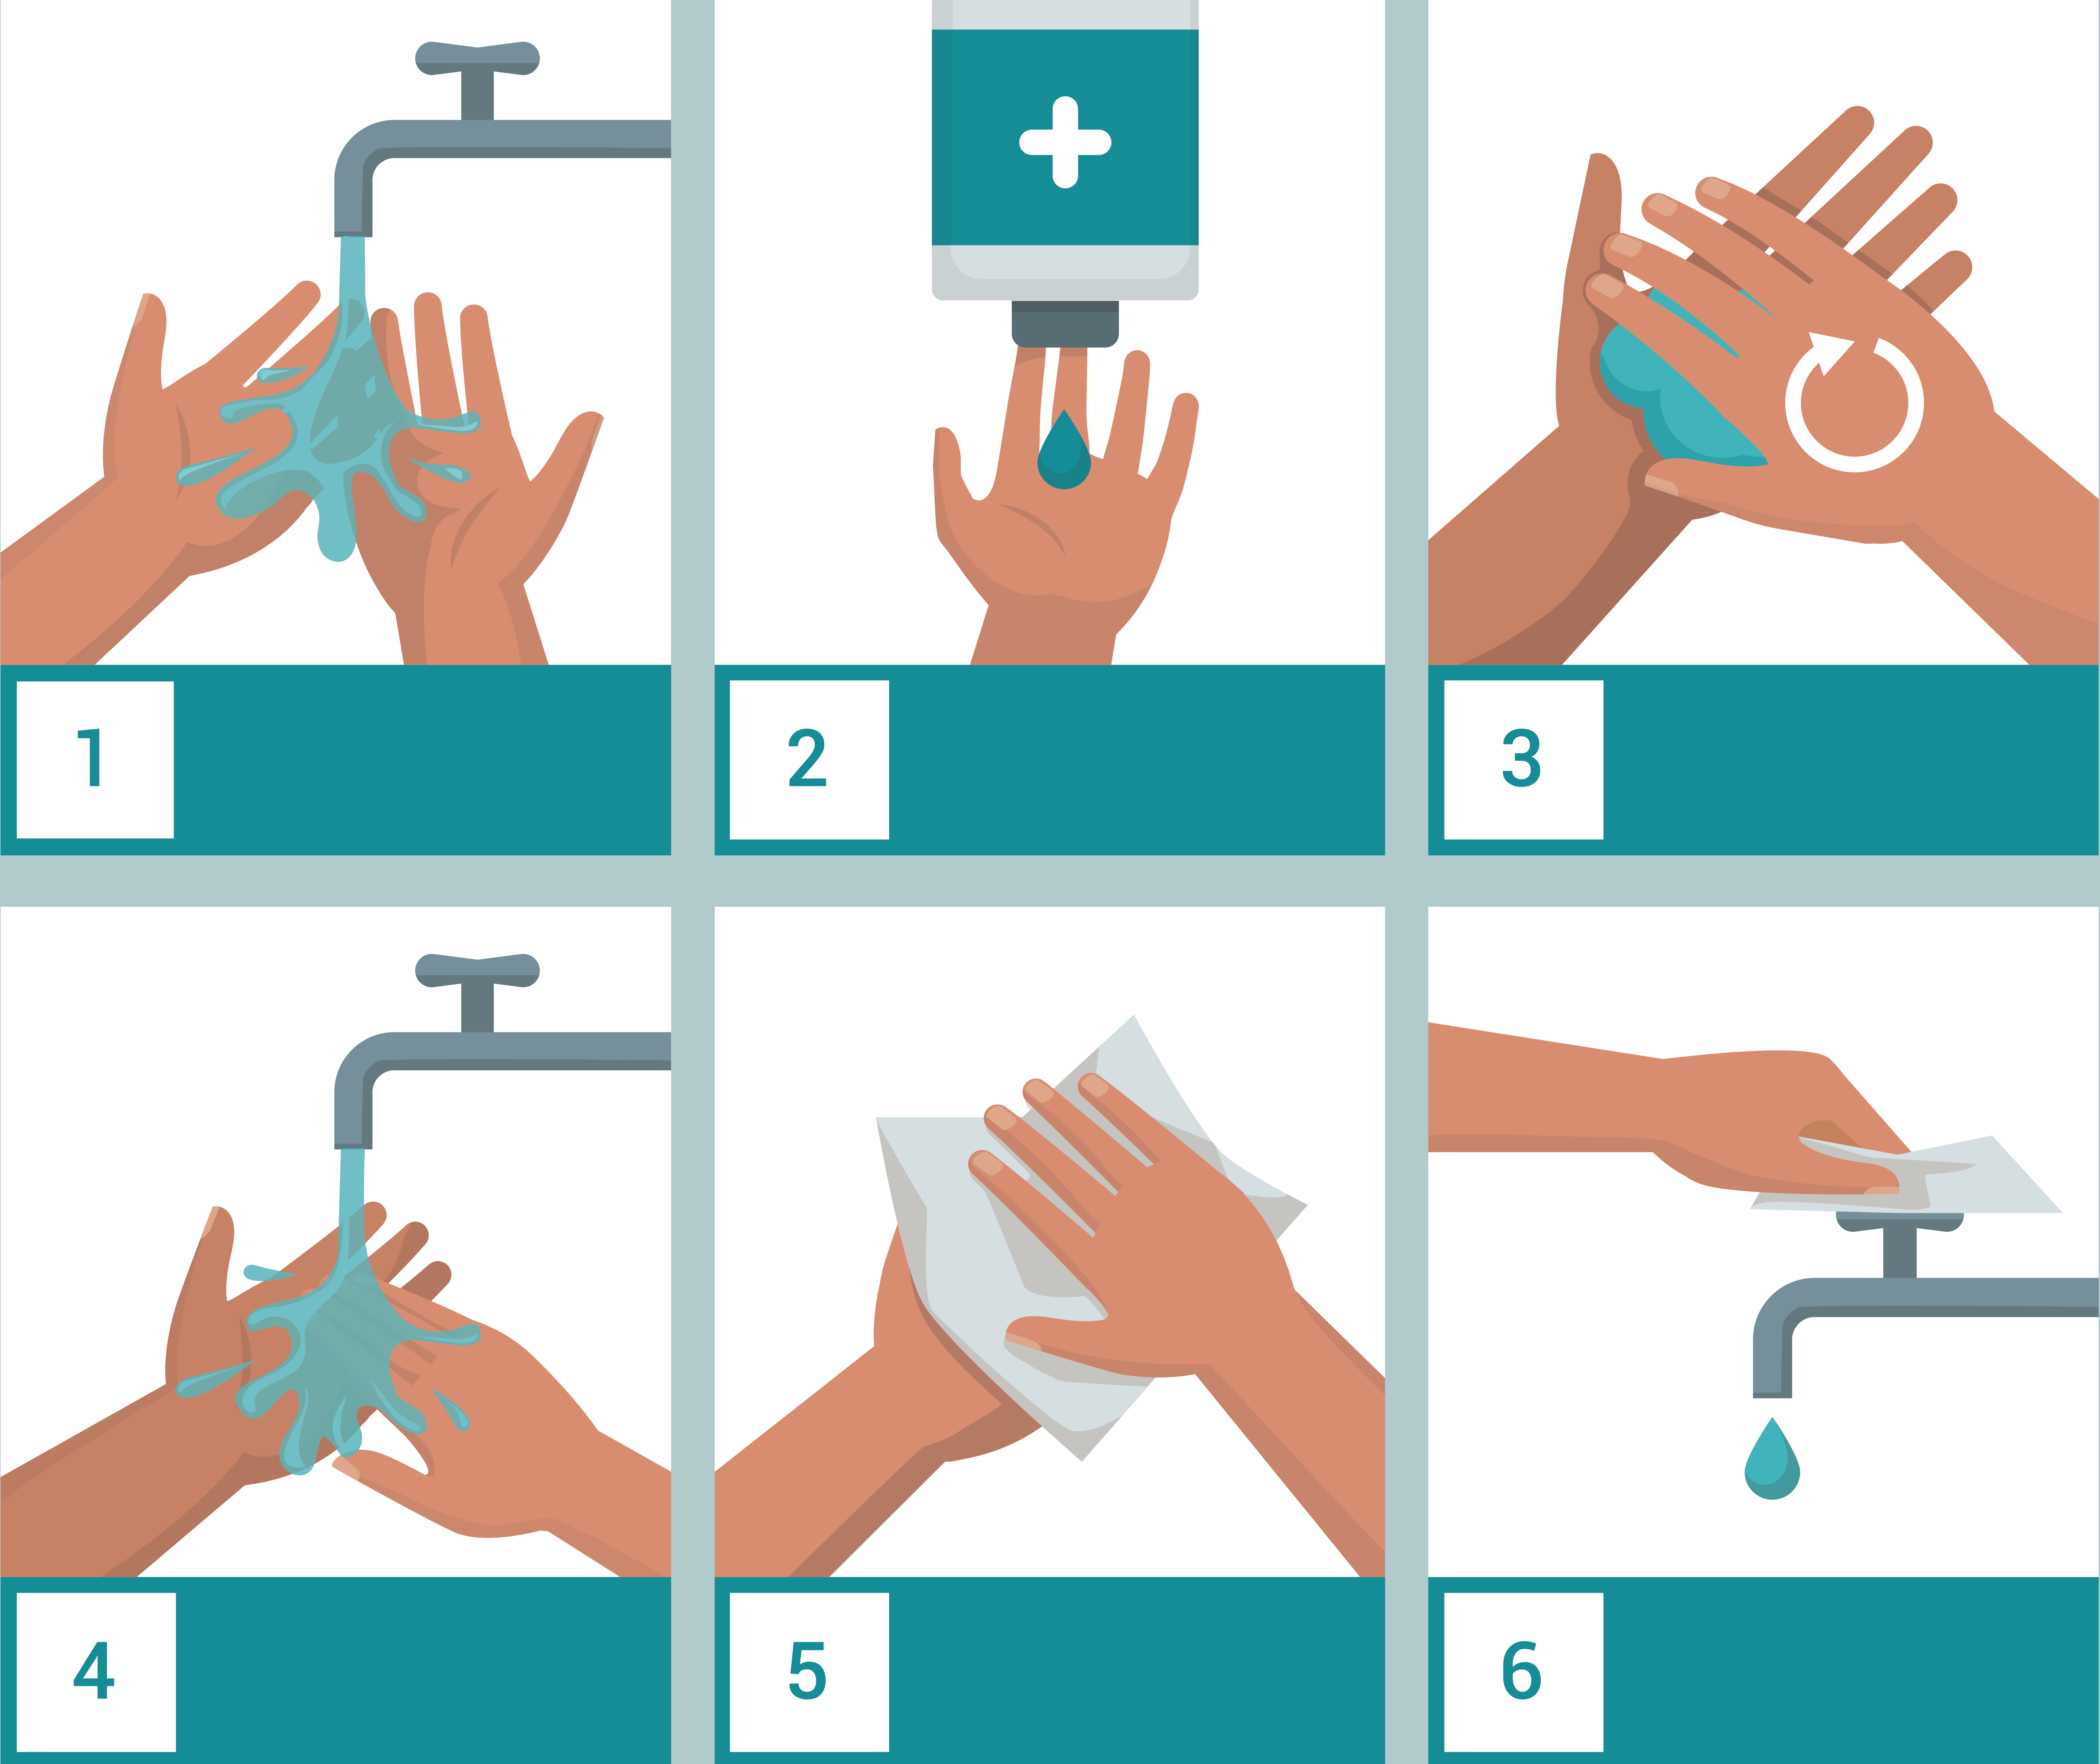 a depiction for the steps of handwashing from from 1 to 6